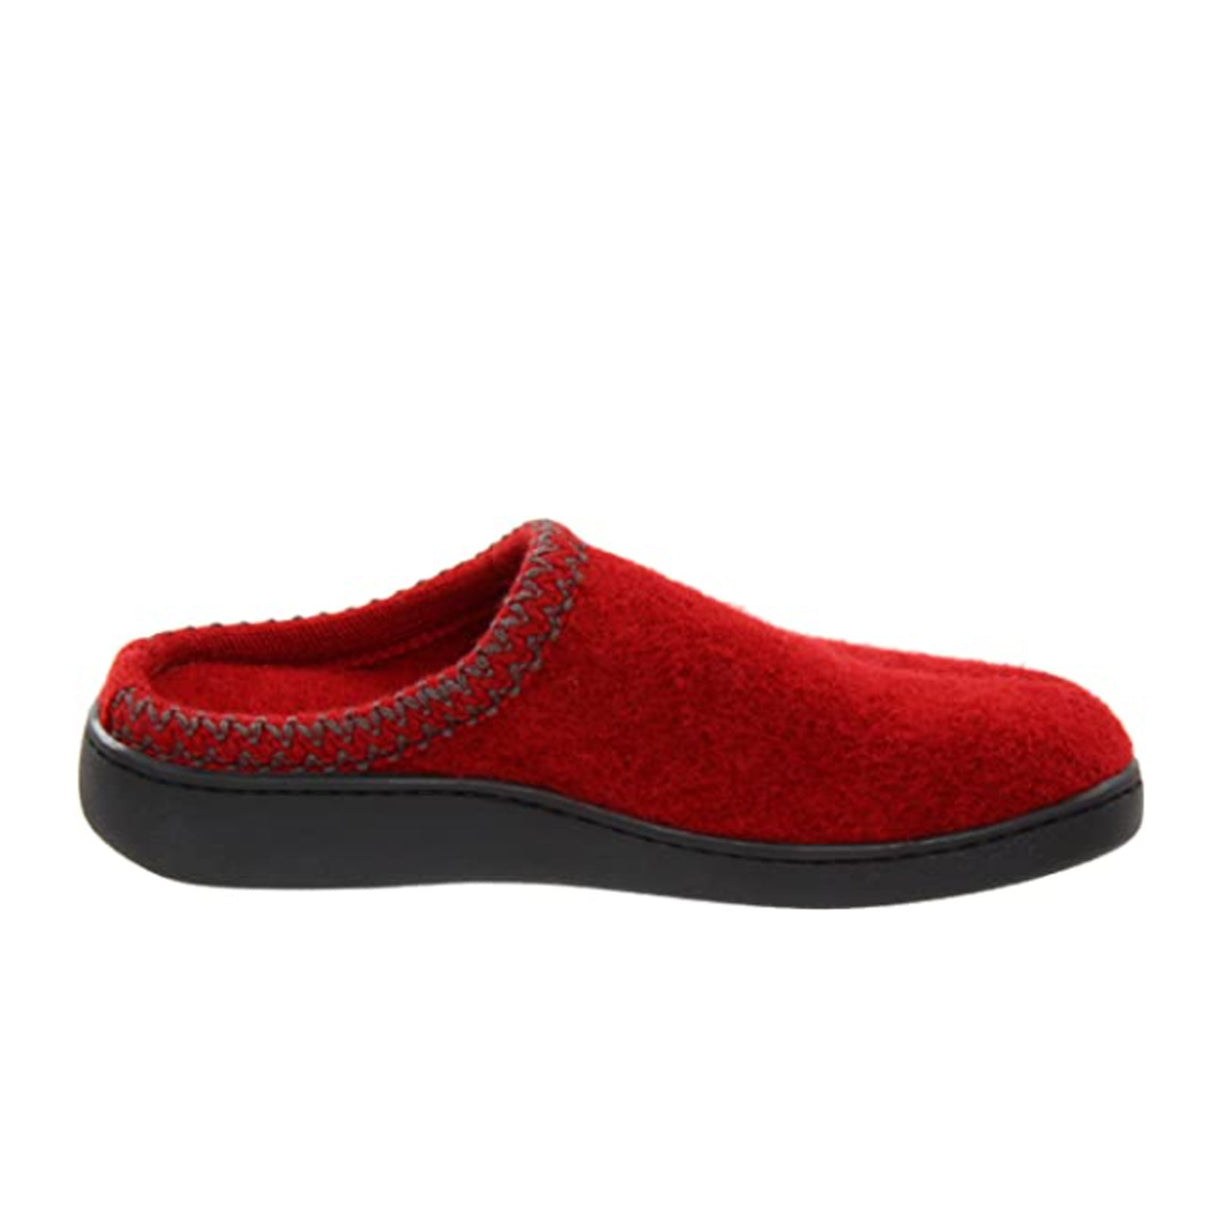 Haflinger AT Slipper (Unisex) - Chili Dress-Casual - Slippers - The Heel Shoe Fitters